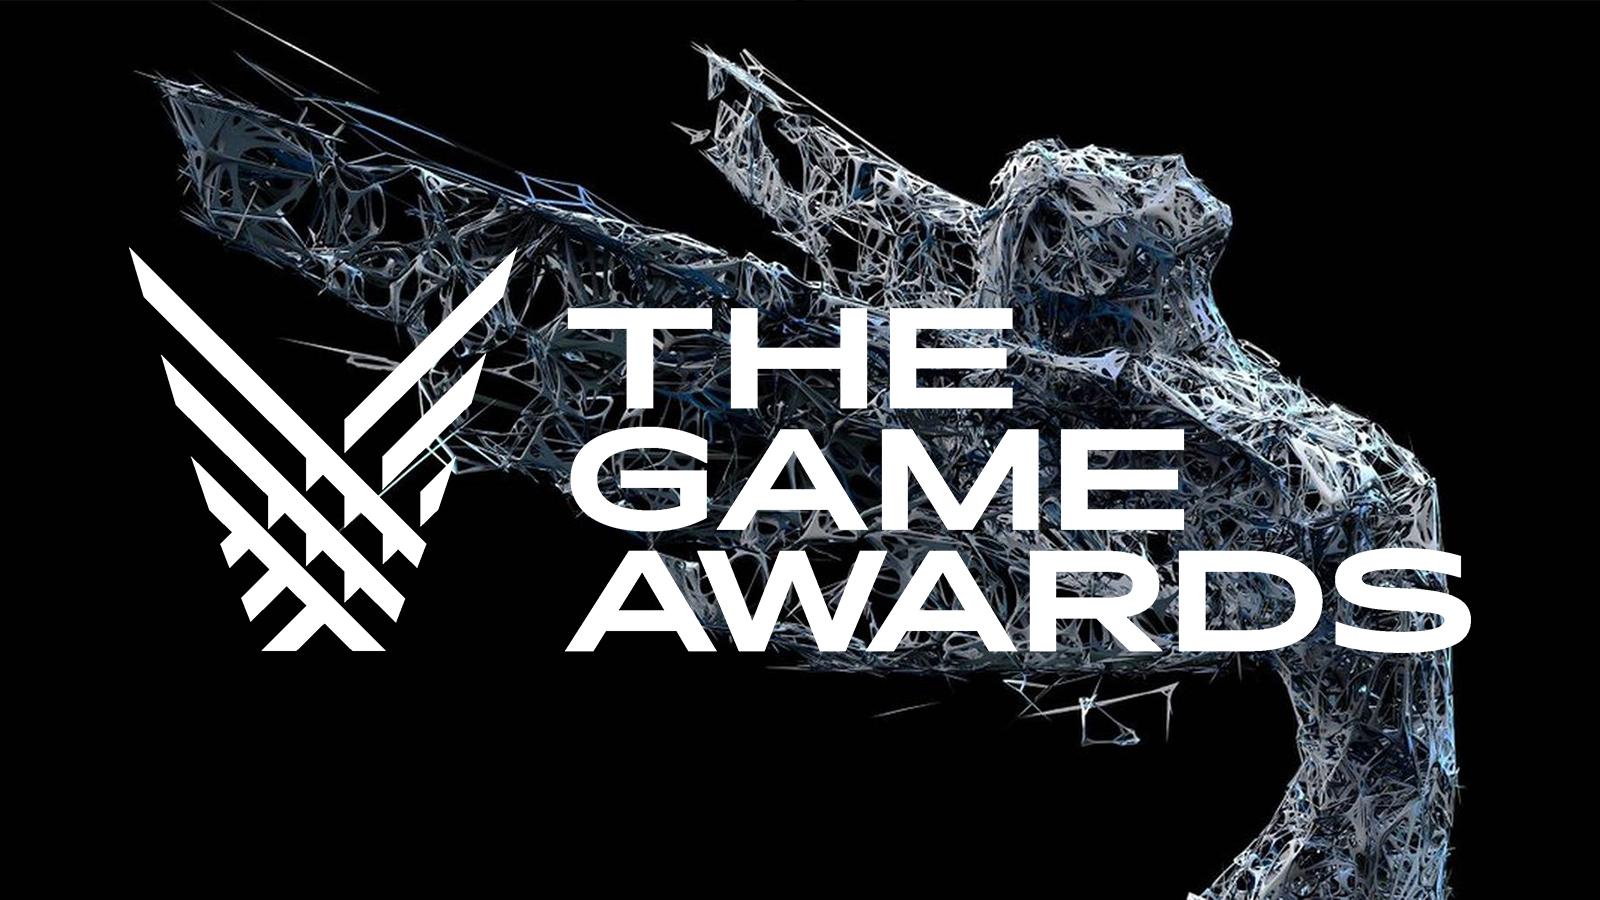 The Game Awards 2022 Nominees Revealed